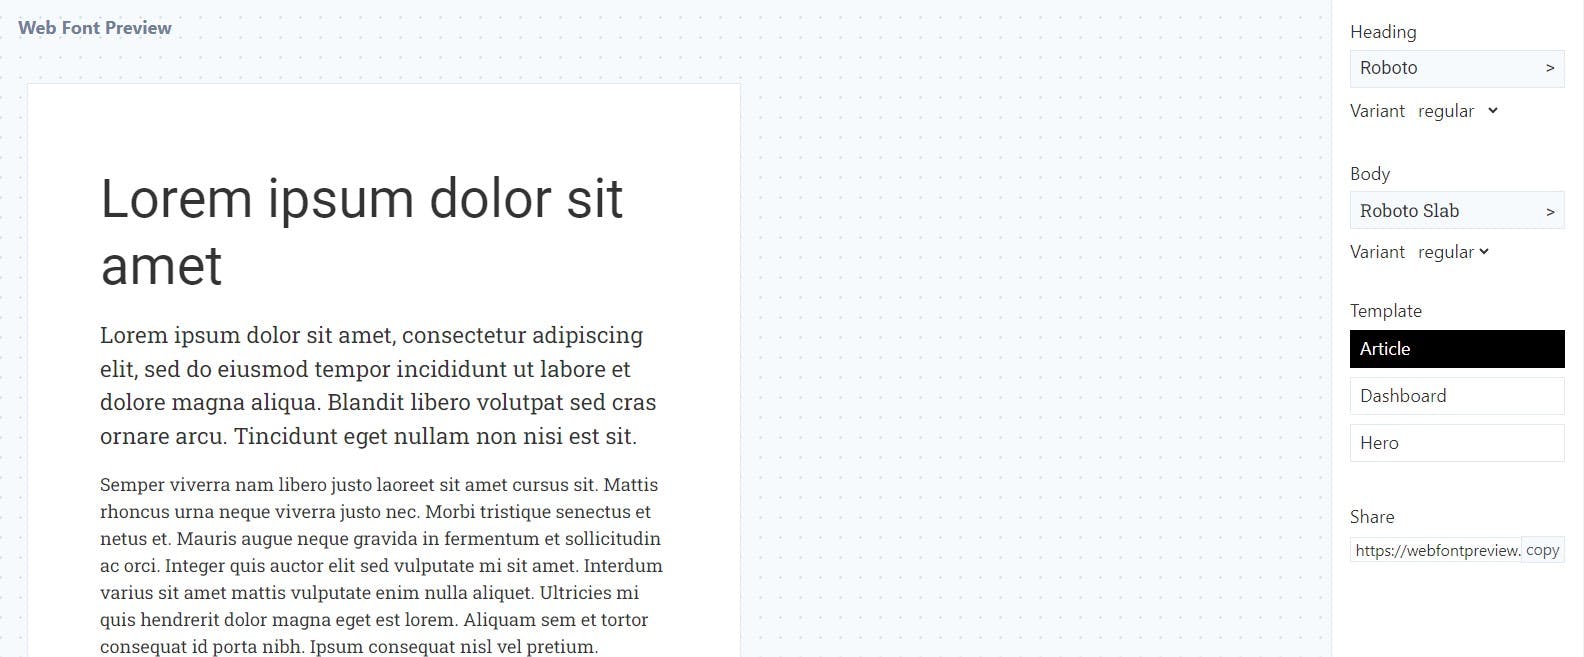 WebfontPreview enables you to experiment with different fonts, sizes, and styles,